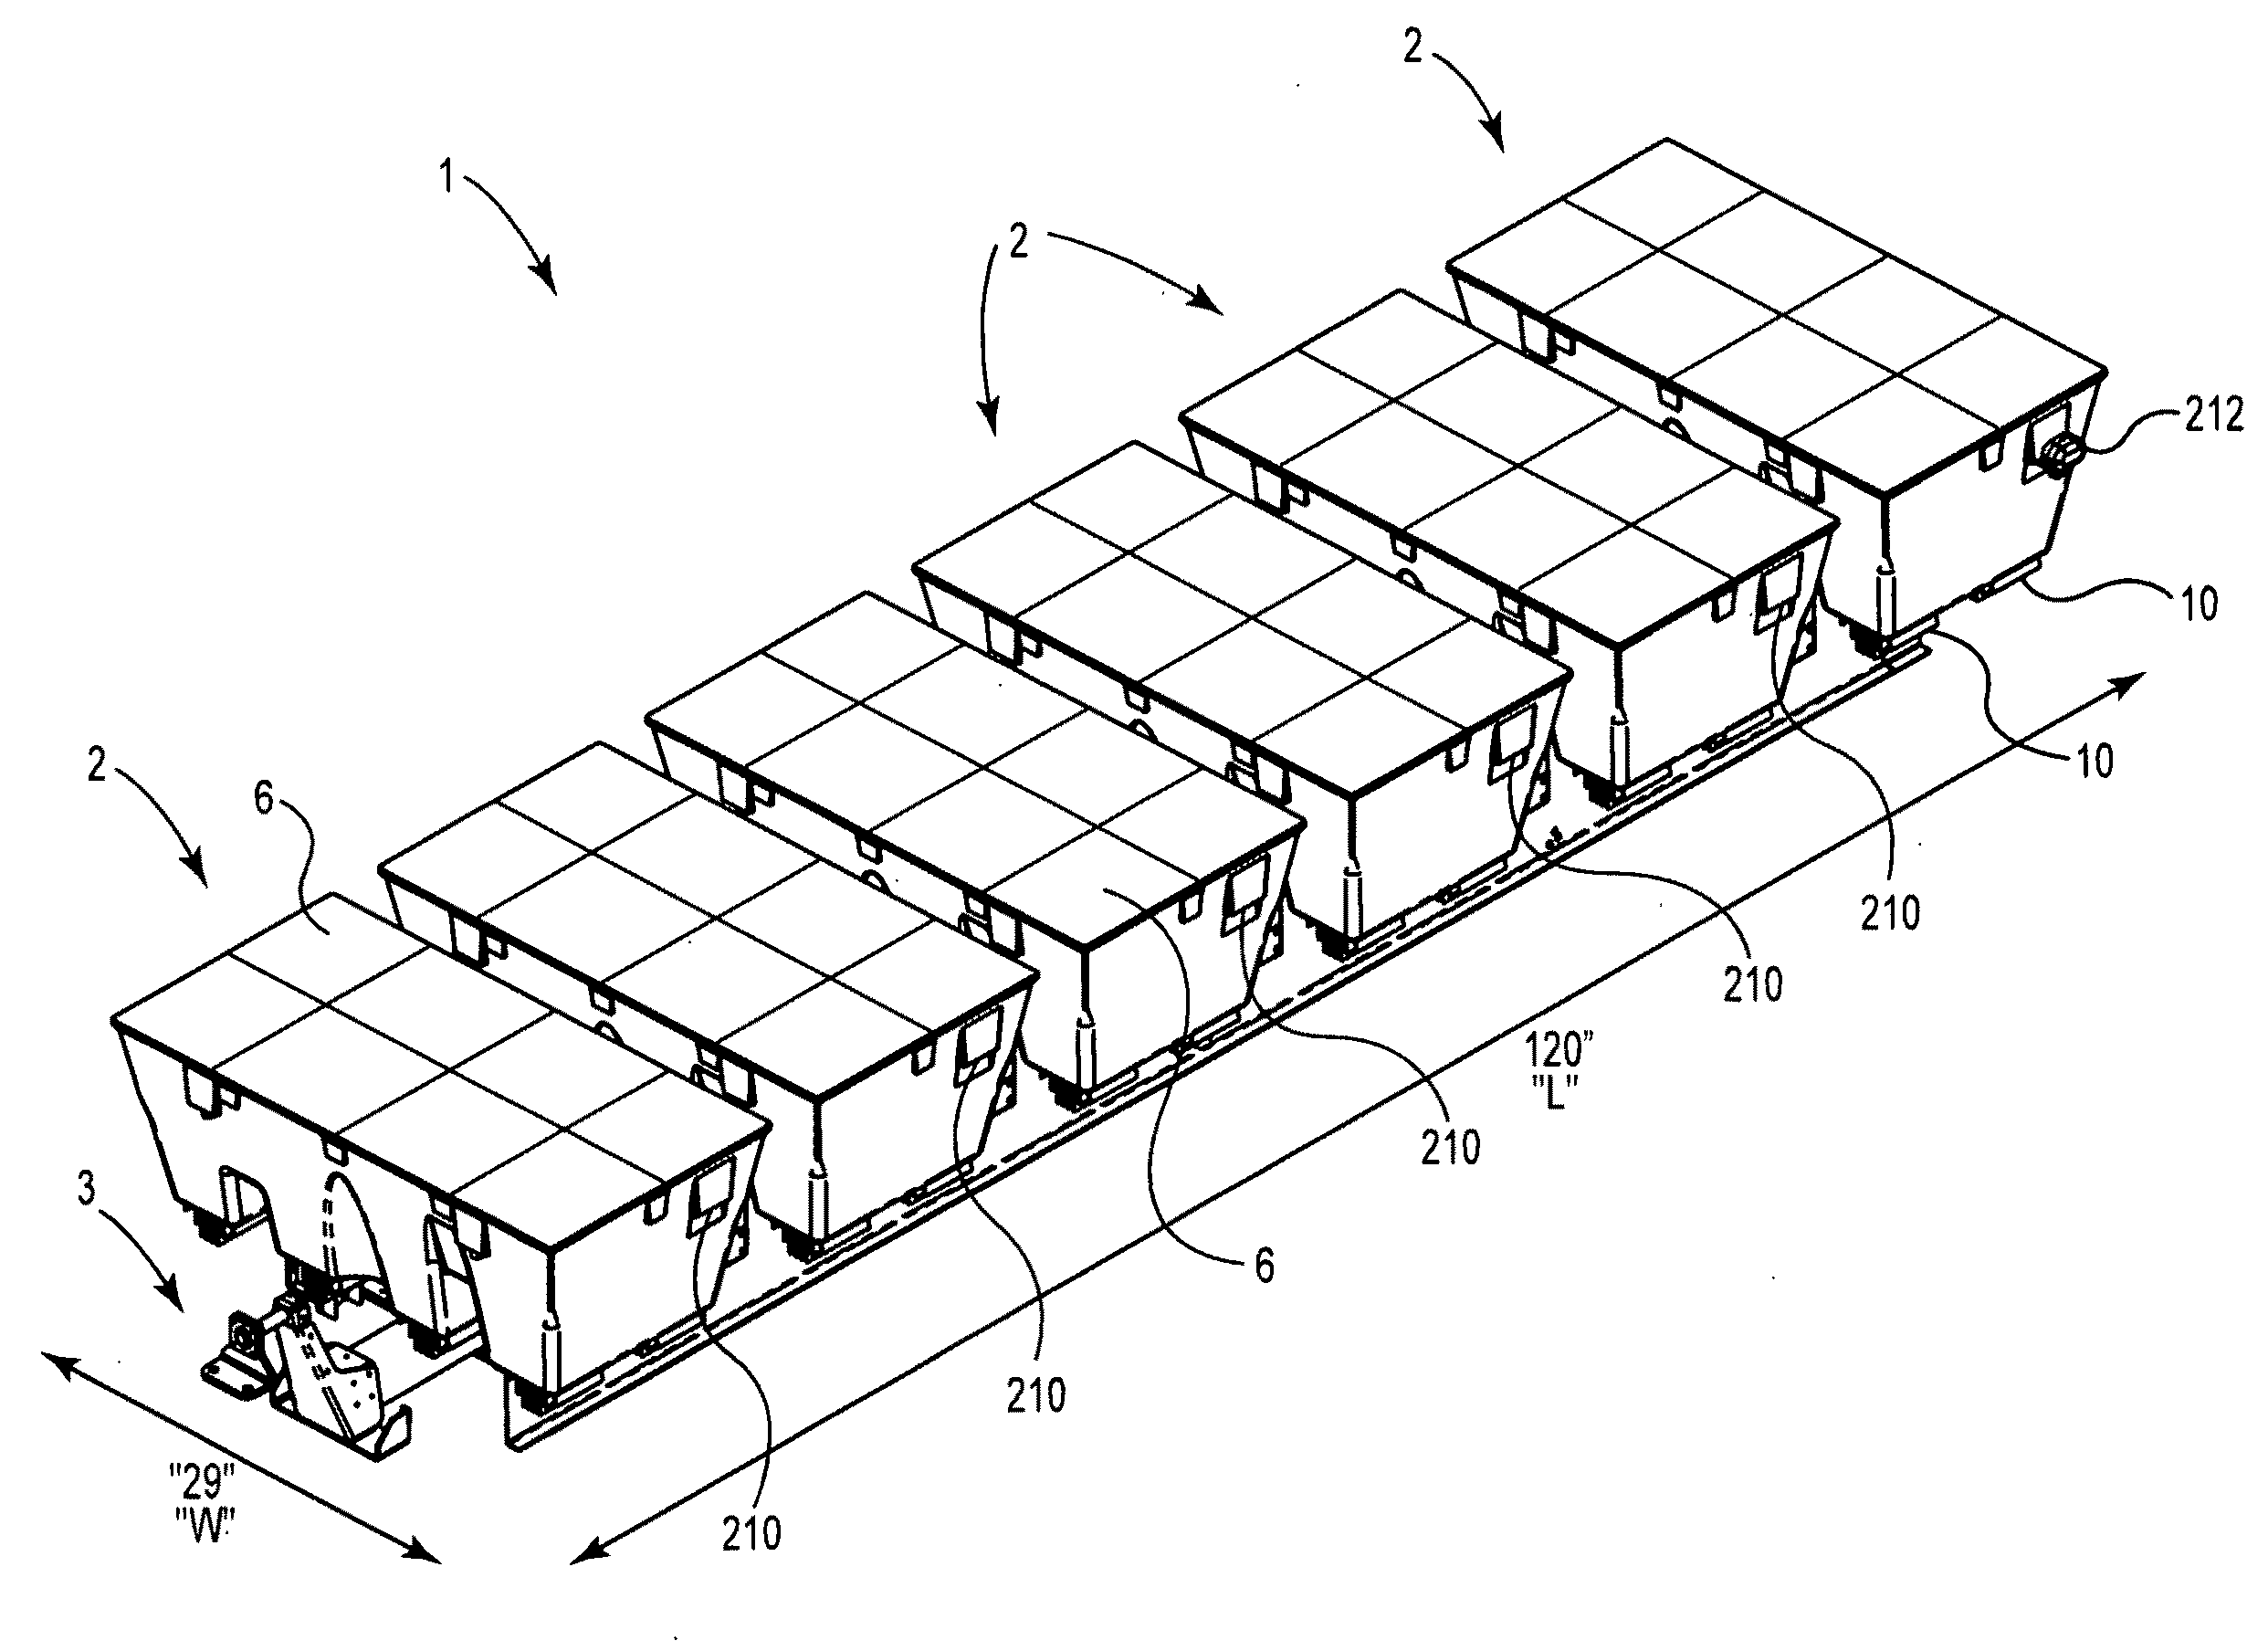 Concentrating photovoltaic solar panel